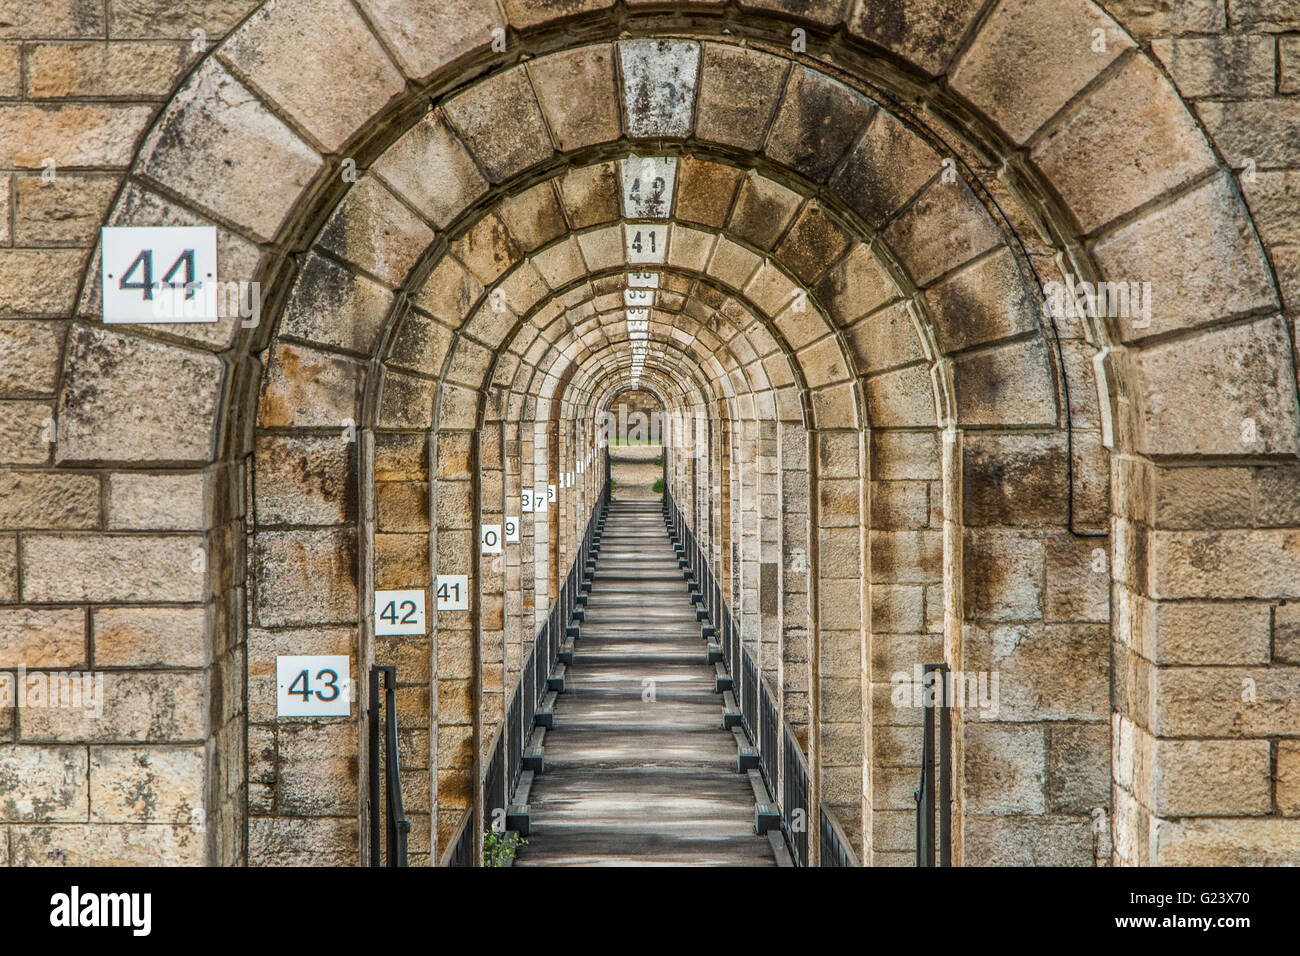 Inside the.Viaduct of Chaumont in the Haute Marne region of France Stock Photo